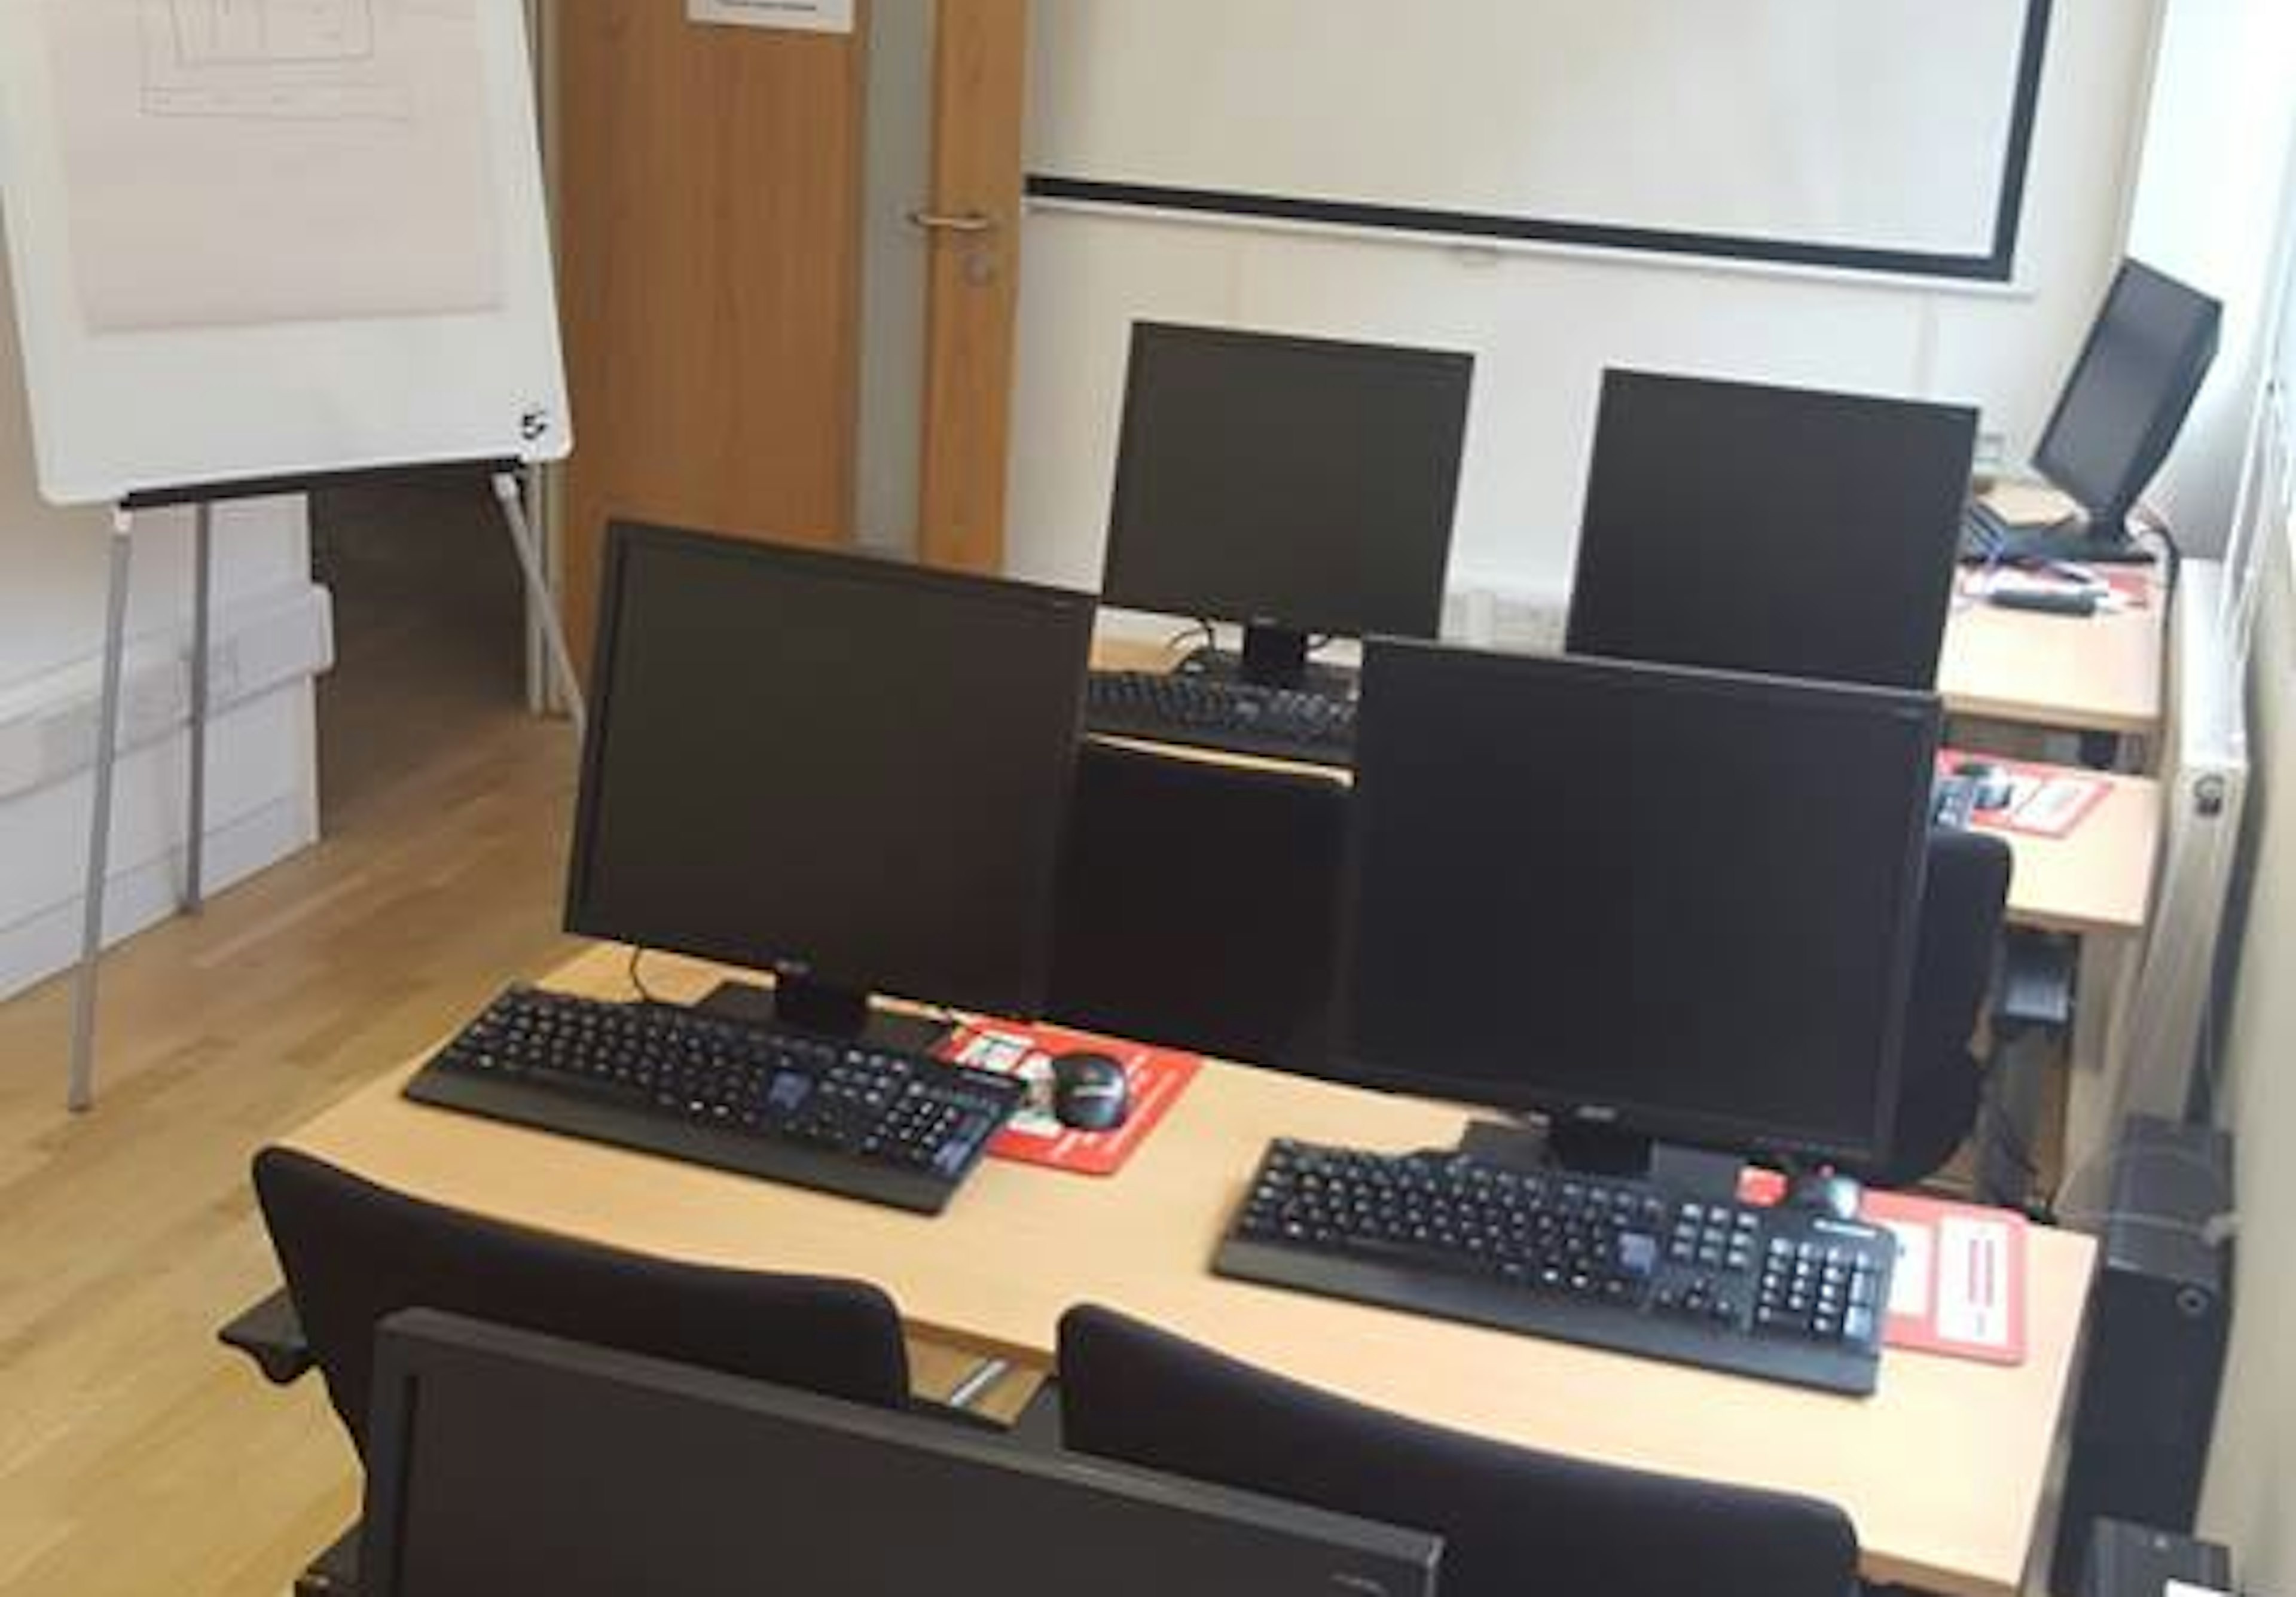 Business - The Training Room Hire Company